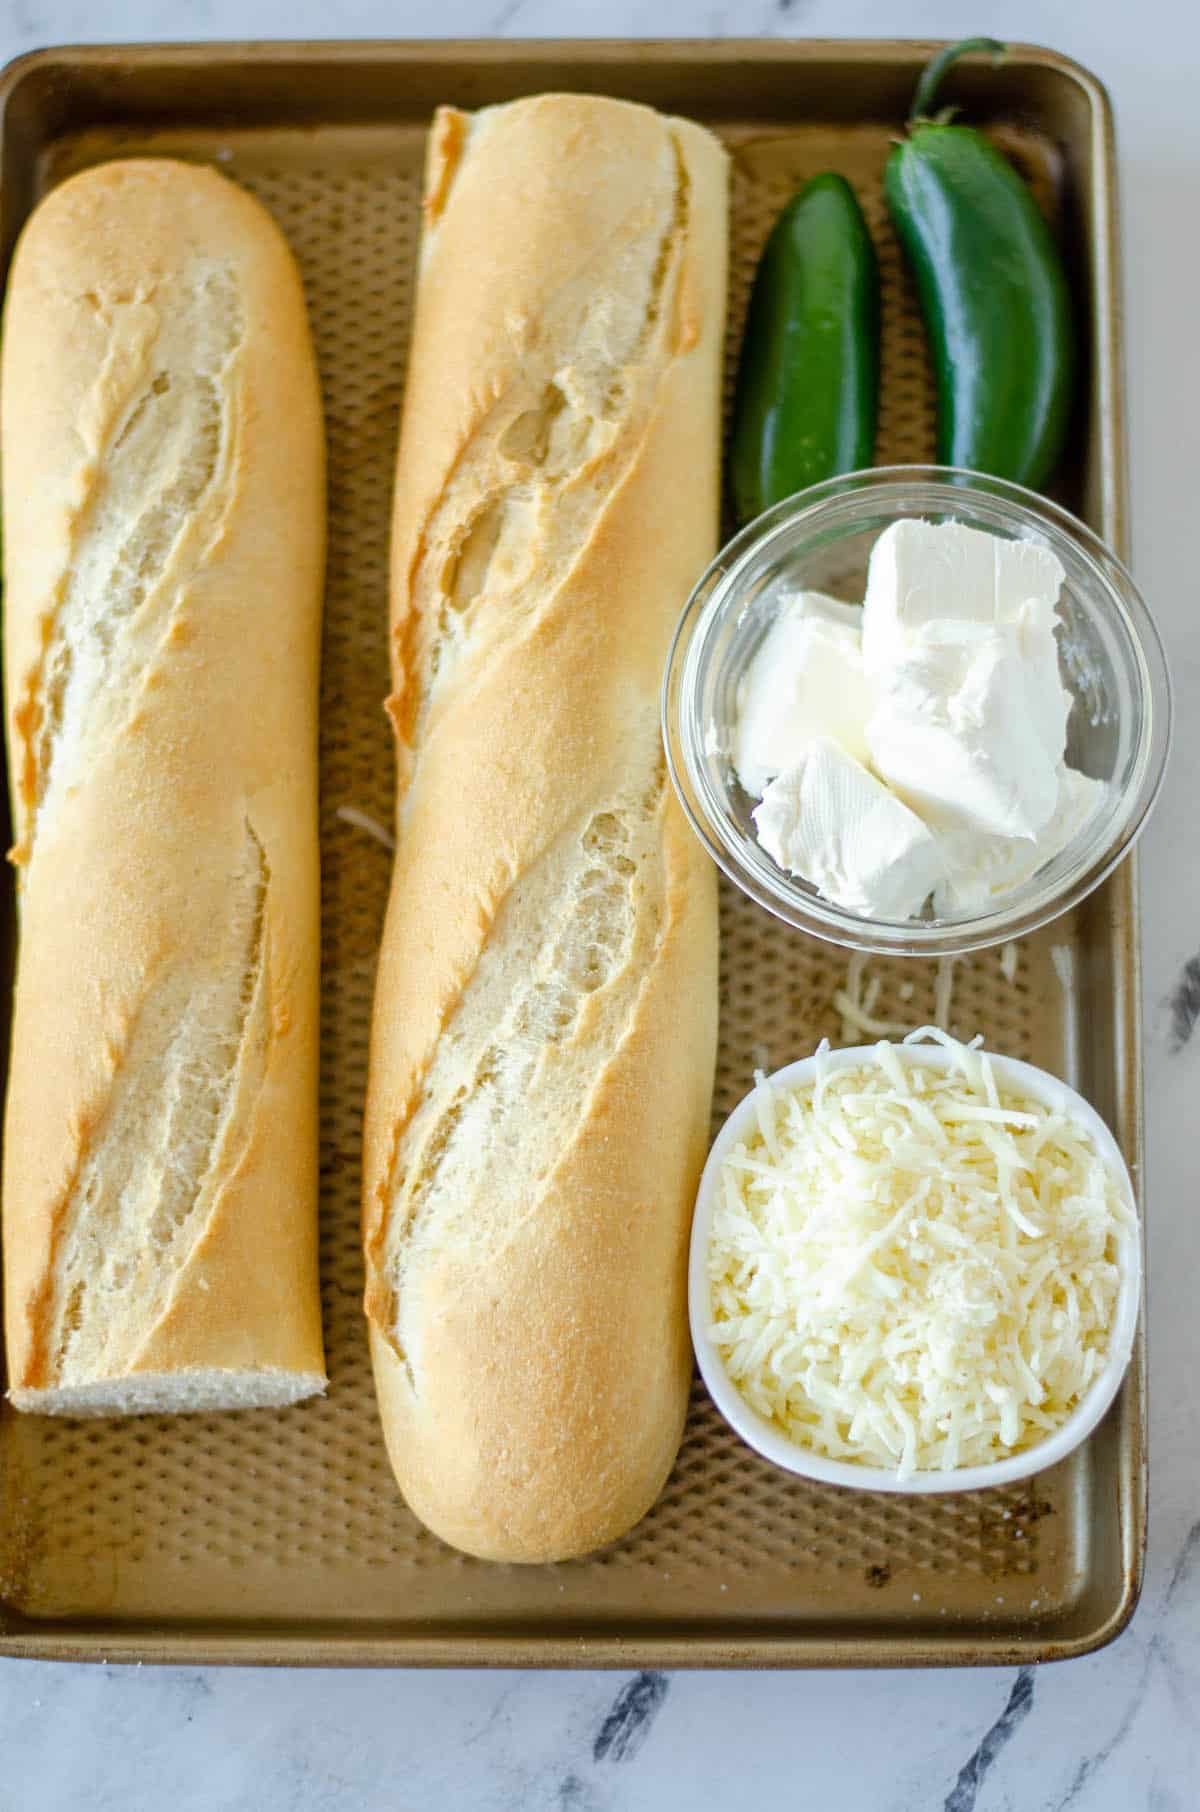 ingredients in the jalapeno bread on a cooking sheet